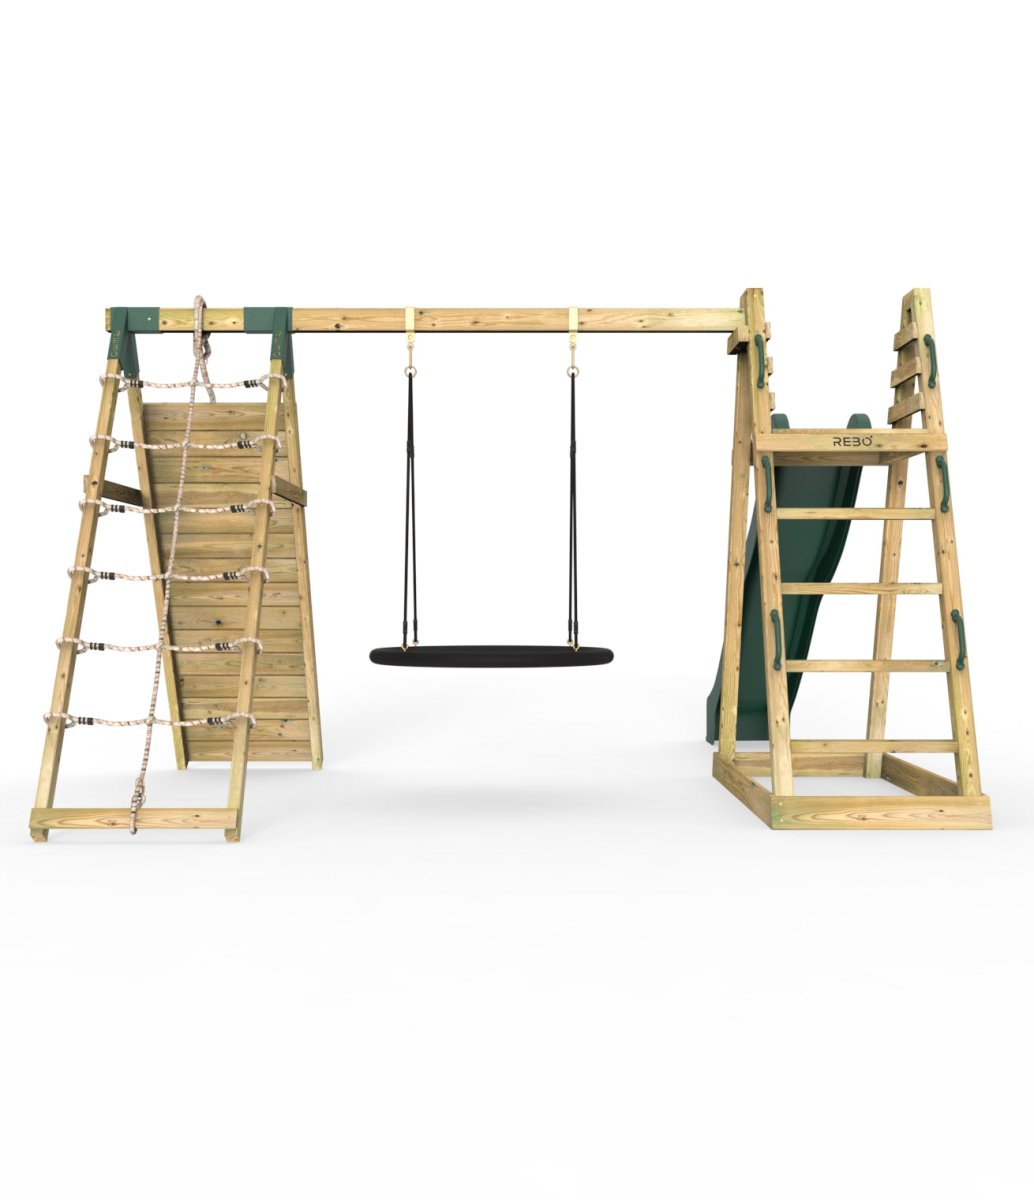 Rebo Wooden Pyramid Climbing Frame with Swings & 10ft Water Slide - Looking Glass